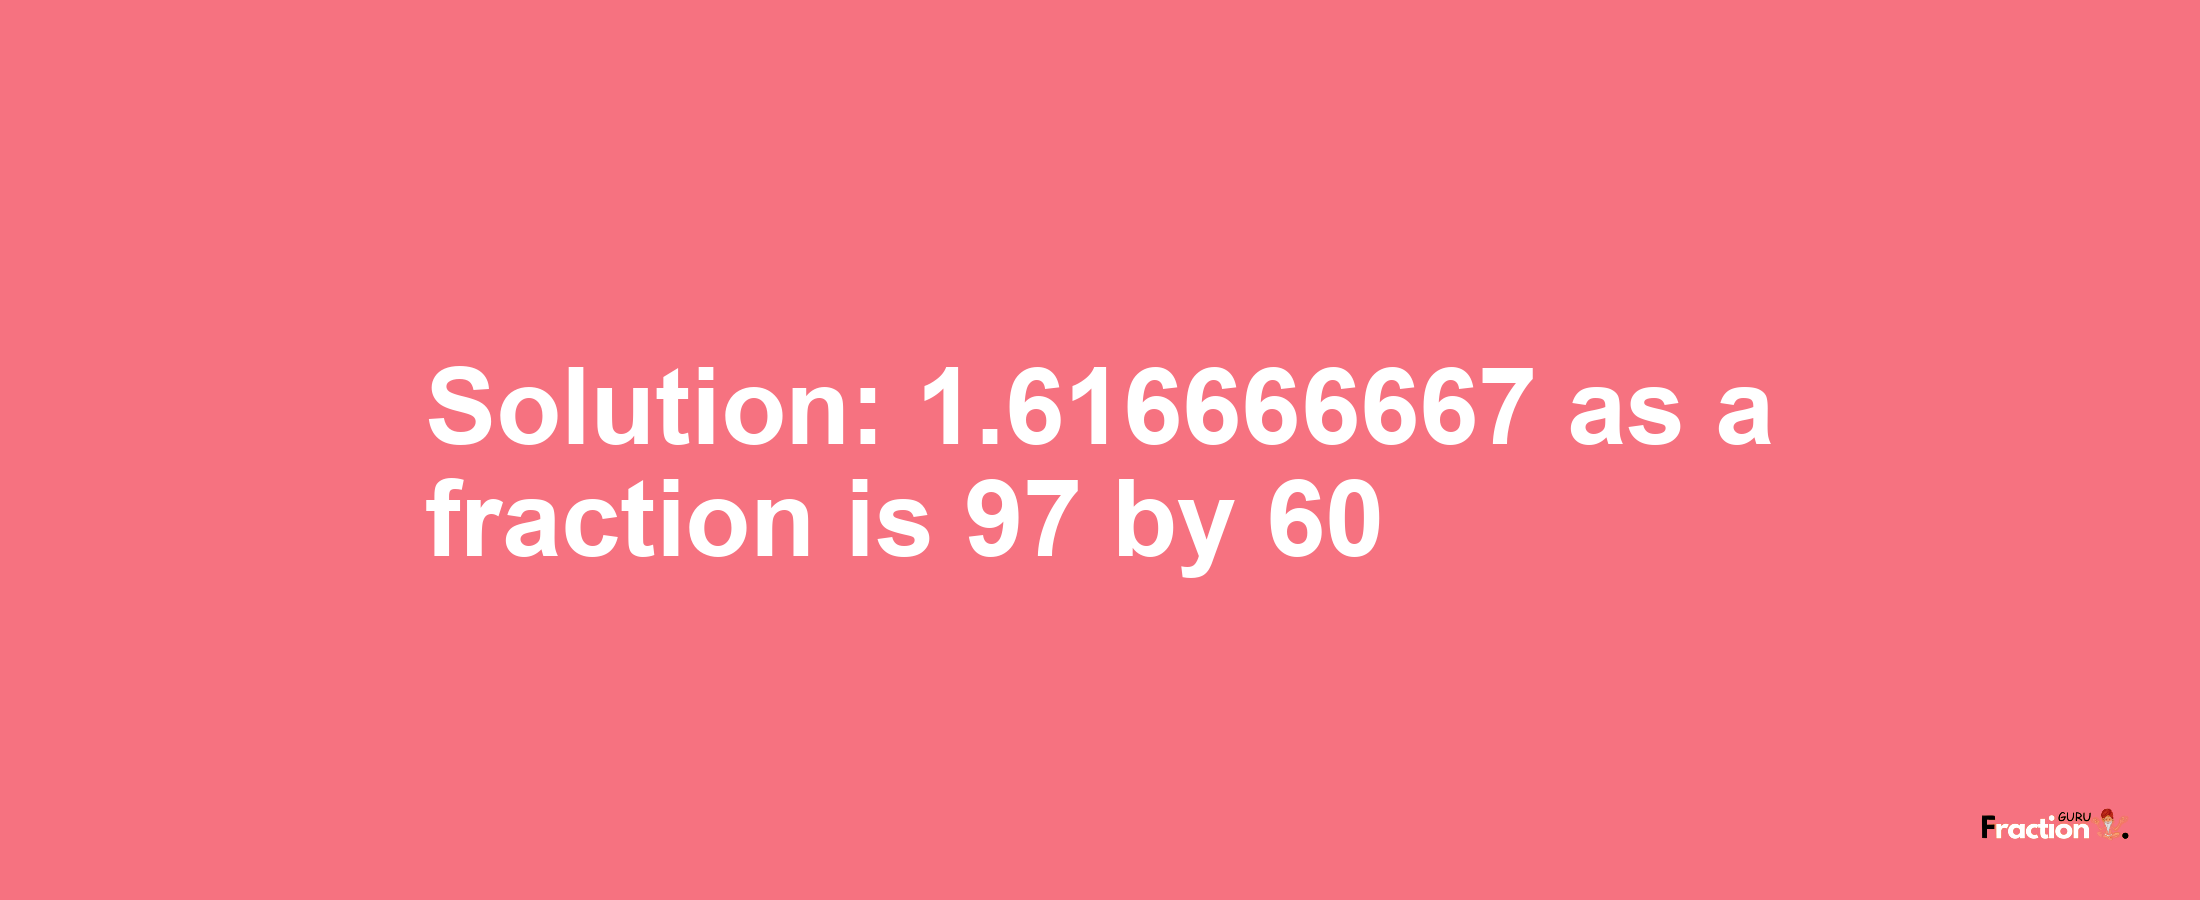 Solution:1.616666667 as a fraction is 97/60